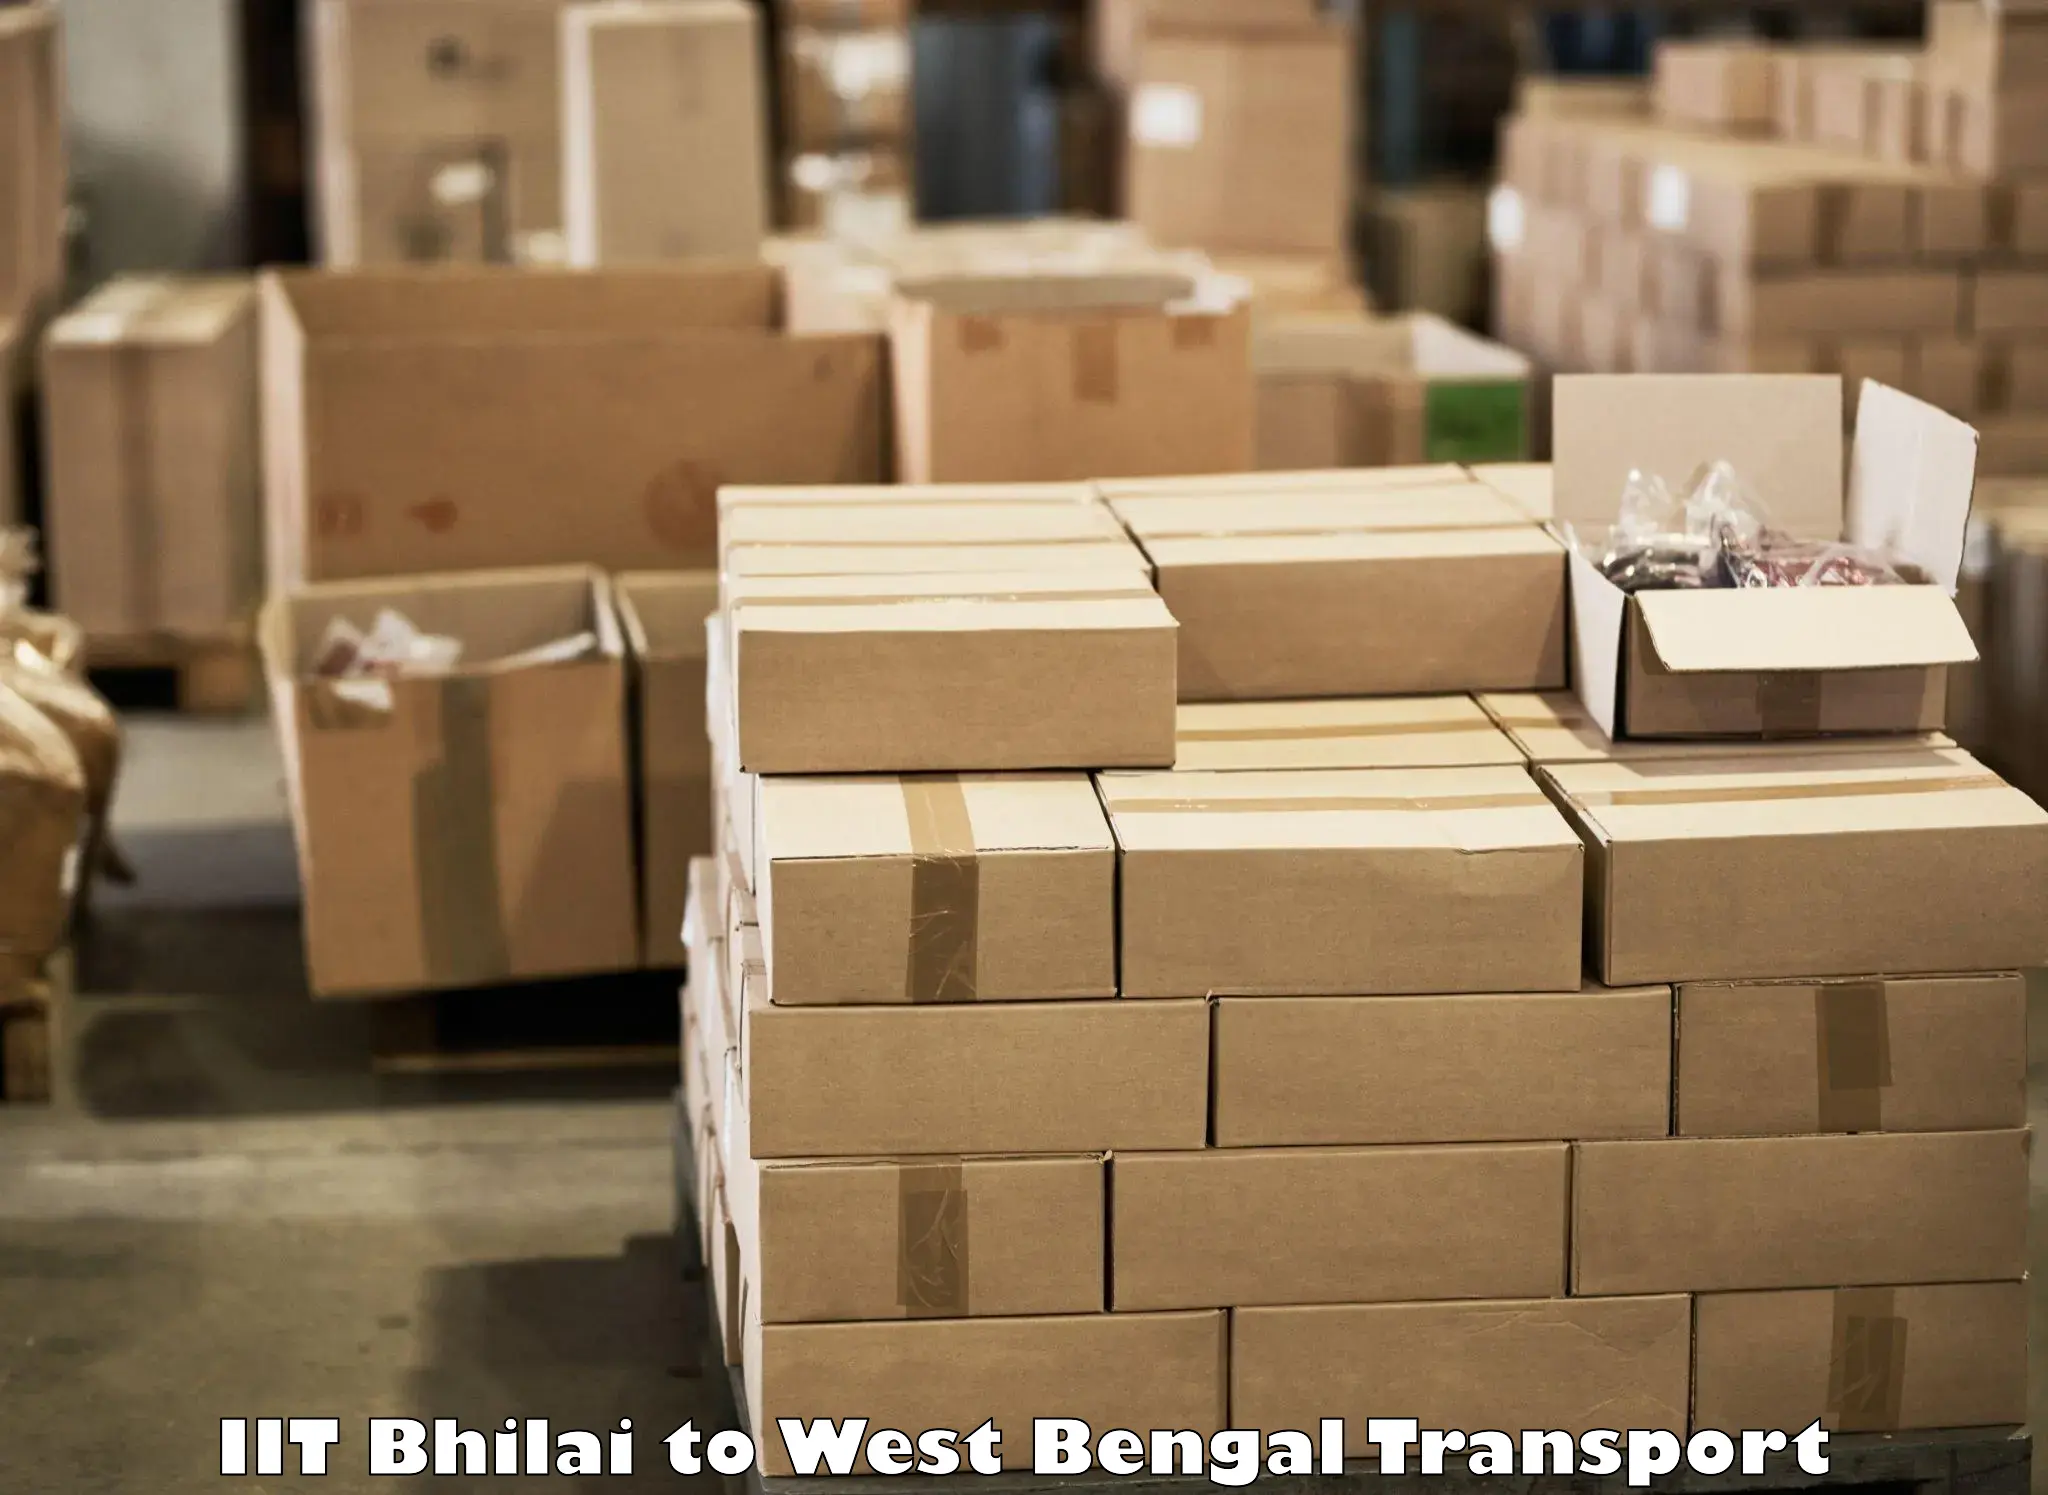 Nearby transport service IIT Bhilai to Nabadwip